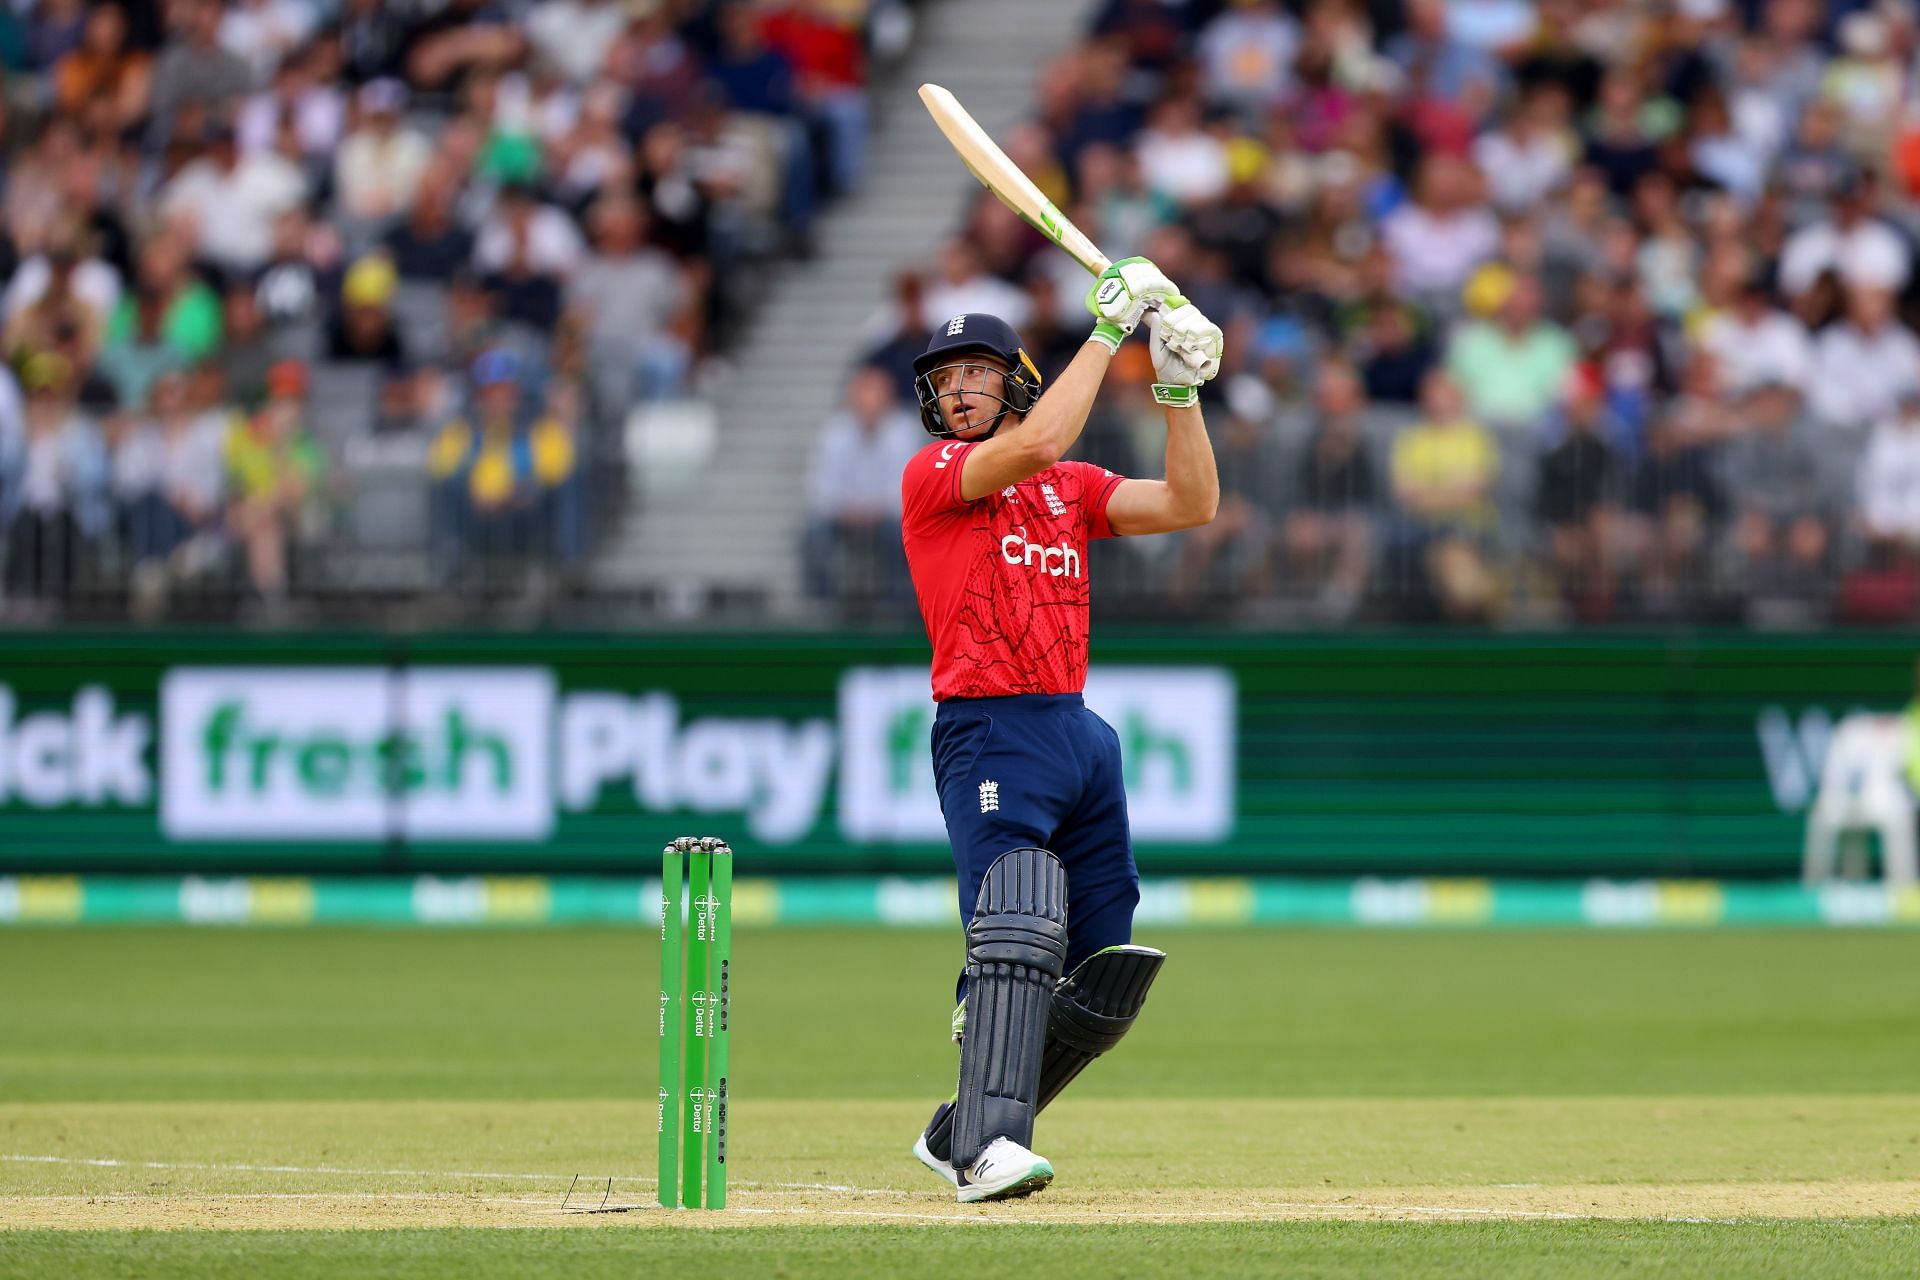 Jos Buttler will look to carry his form into the World Cup. (Credits: Getty)